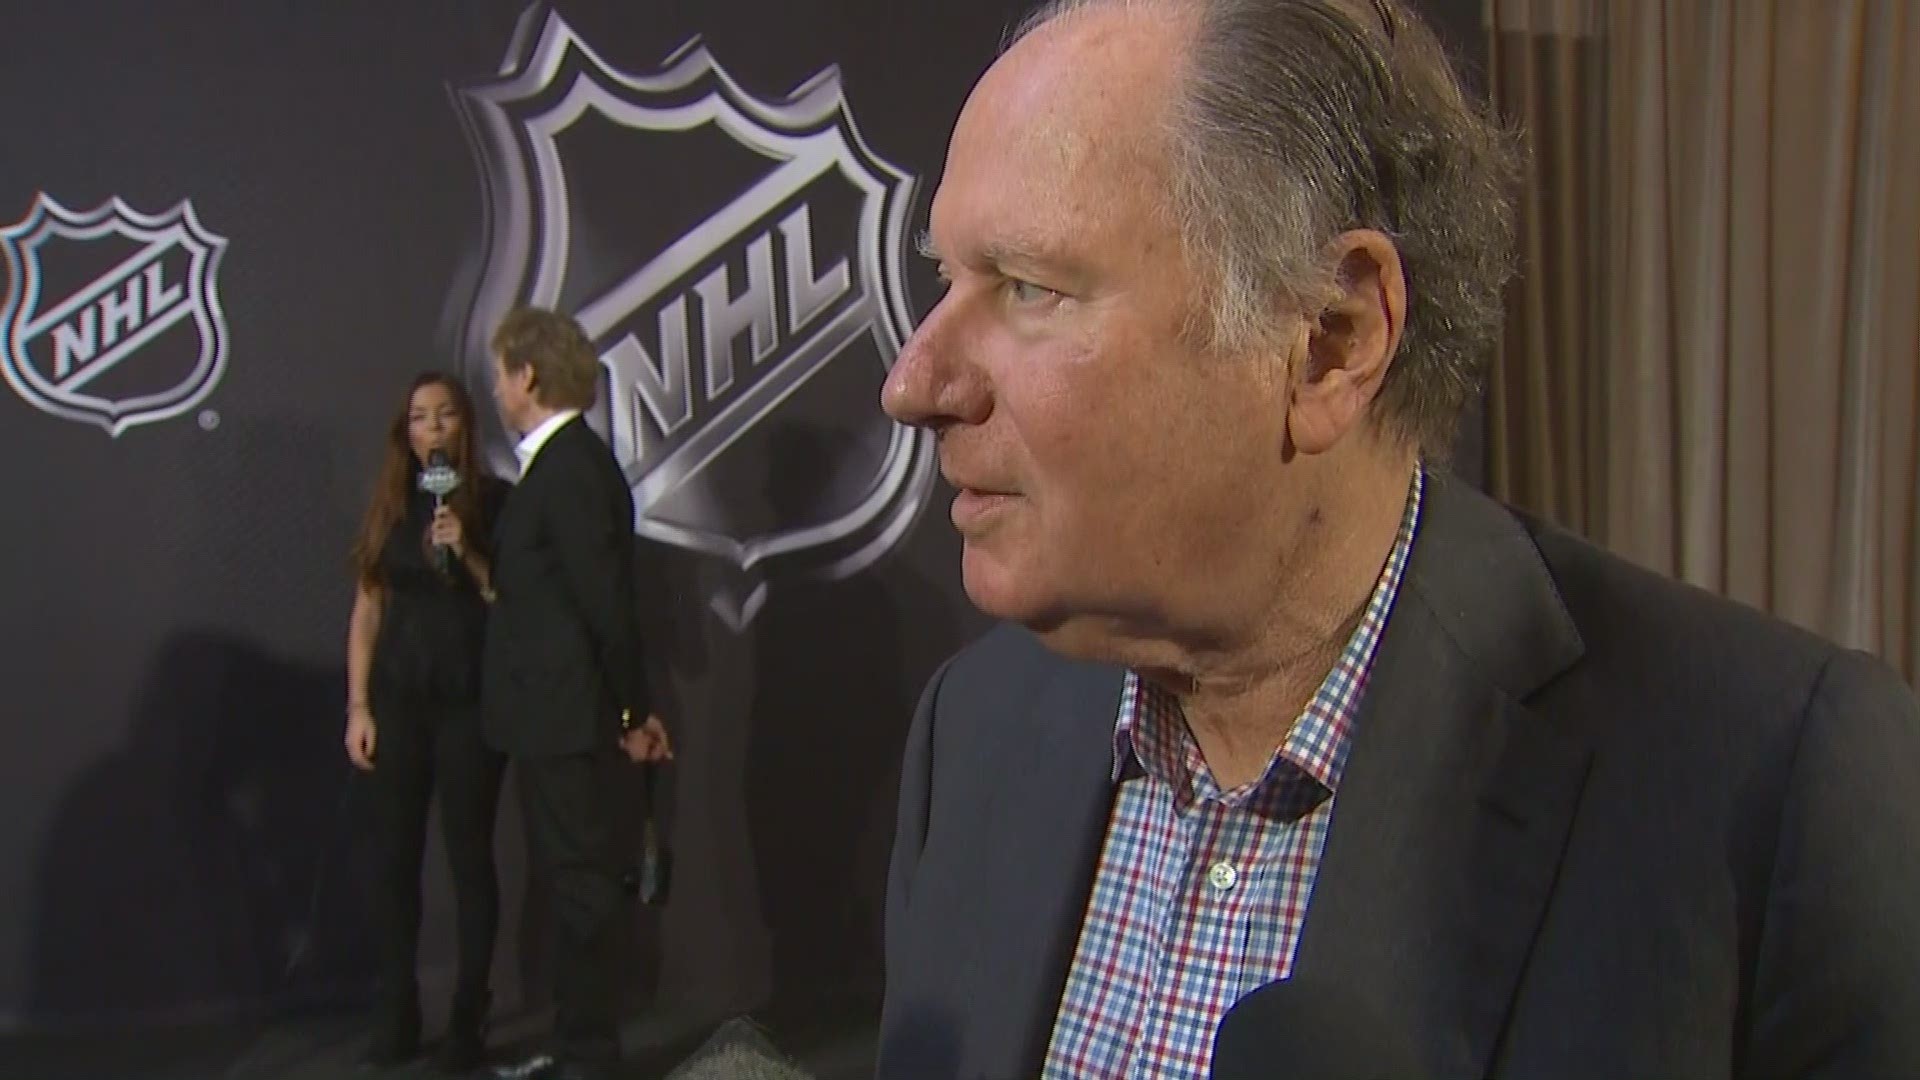 Seattle NHL team owner David Bonderman reacts to announcement of expansion team. KING 5's Chris Daniels caught up with him: